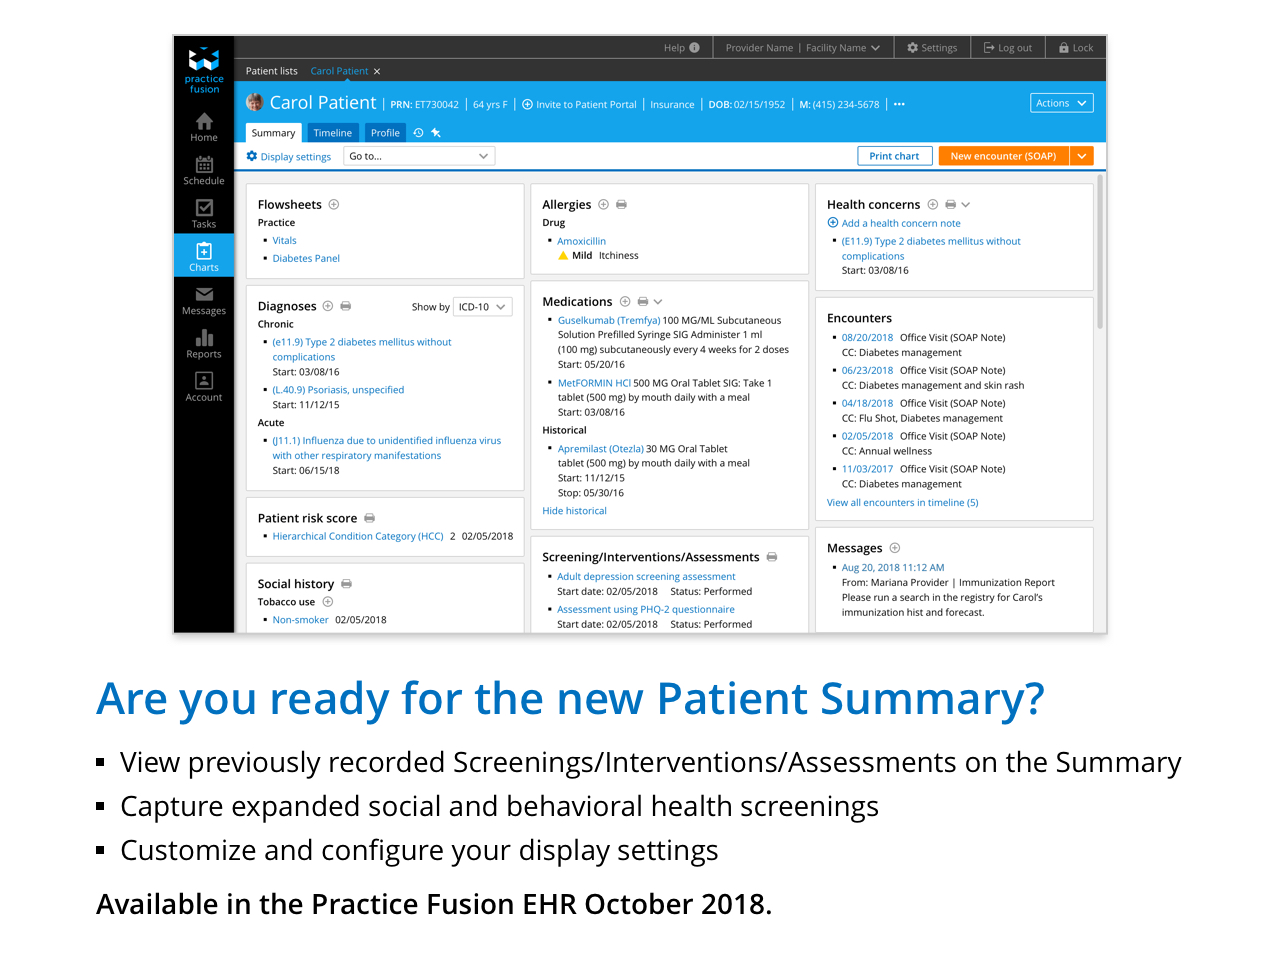 View previously recorded Screening/Interventions/Assessments on the Summary - Capture expanded social and behavioral health screenings - Customize and configure your display settings. Available in the Practice Fusion EHR October 2018.